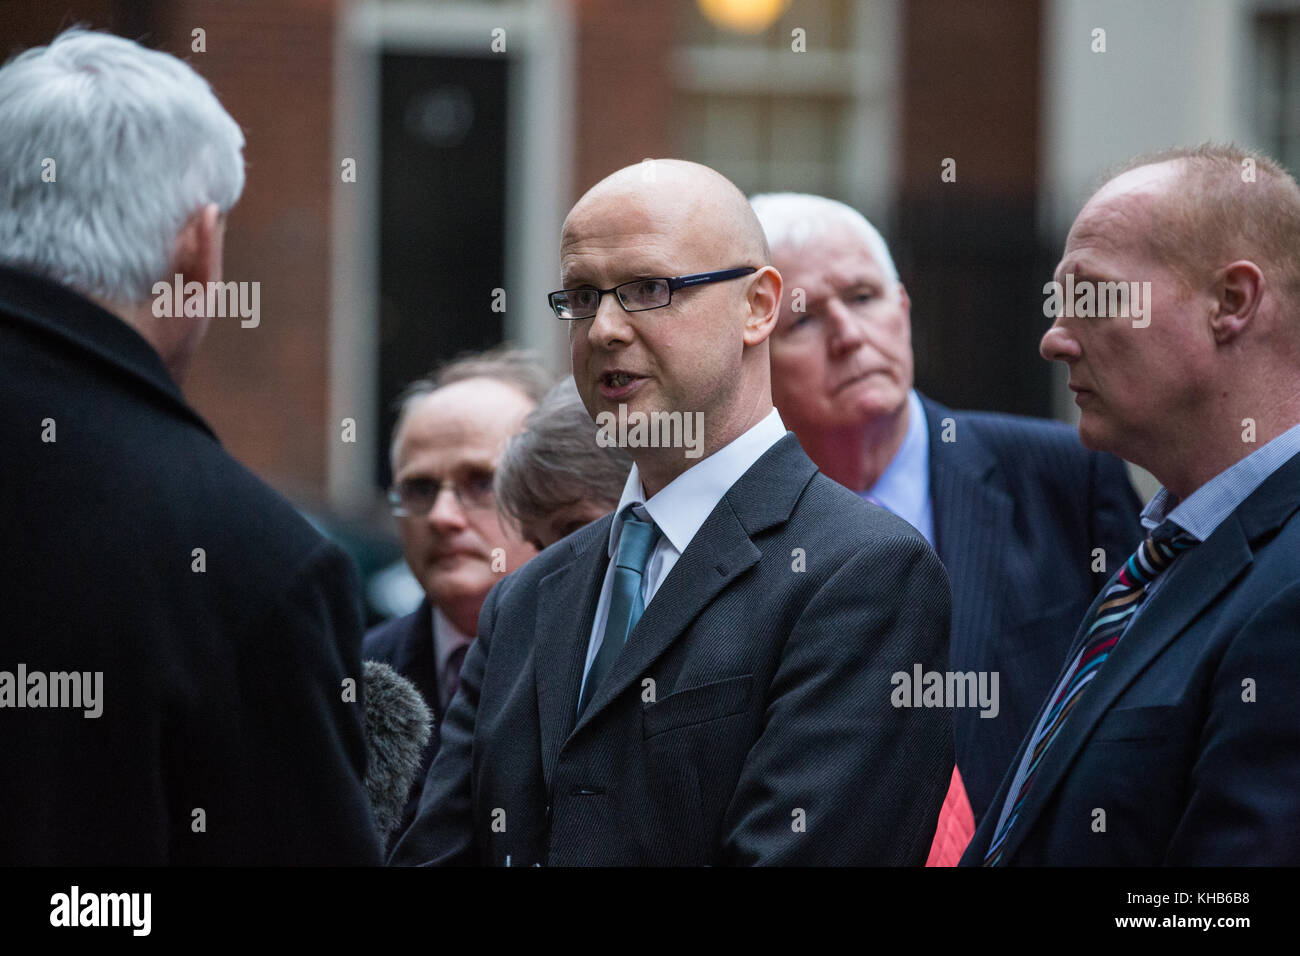 London, UK. 14th Nov, 2017. A delegation including Sinn Fein MPs Barry McElduff and Francie Molloy is interviewed by the media in Downing Street having presented a petition regarding the 1974 killing of Patsy Kelly, 33, a member of Omagh District Council, and having met James Brokenshire, Secretary of State for Northern Ireland. The Police Ombudsman is still investigating the death of the father-of-five after the original RUC investigation was heavily criticised. No one has ever been charged regarding his killing. Credit: Mark Kerrison/Alamy Live News Stock Photo